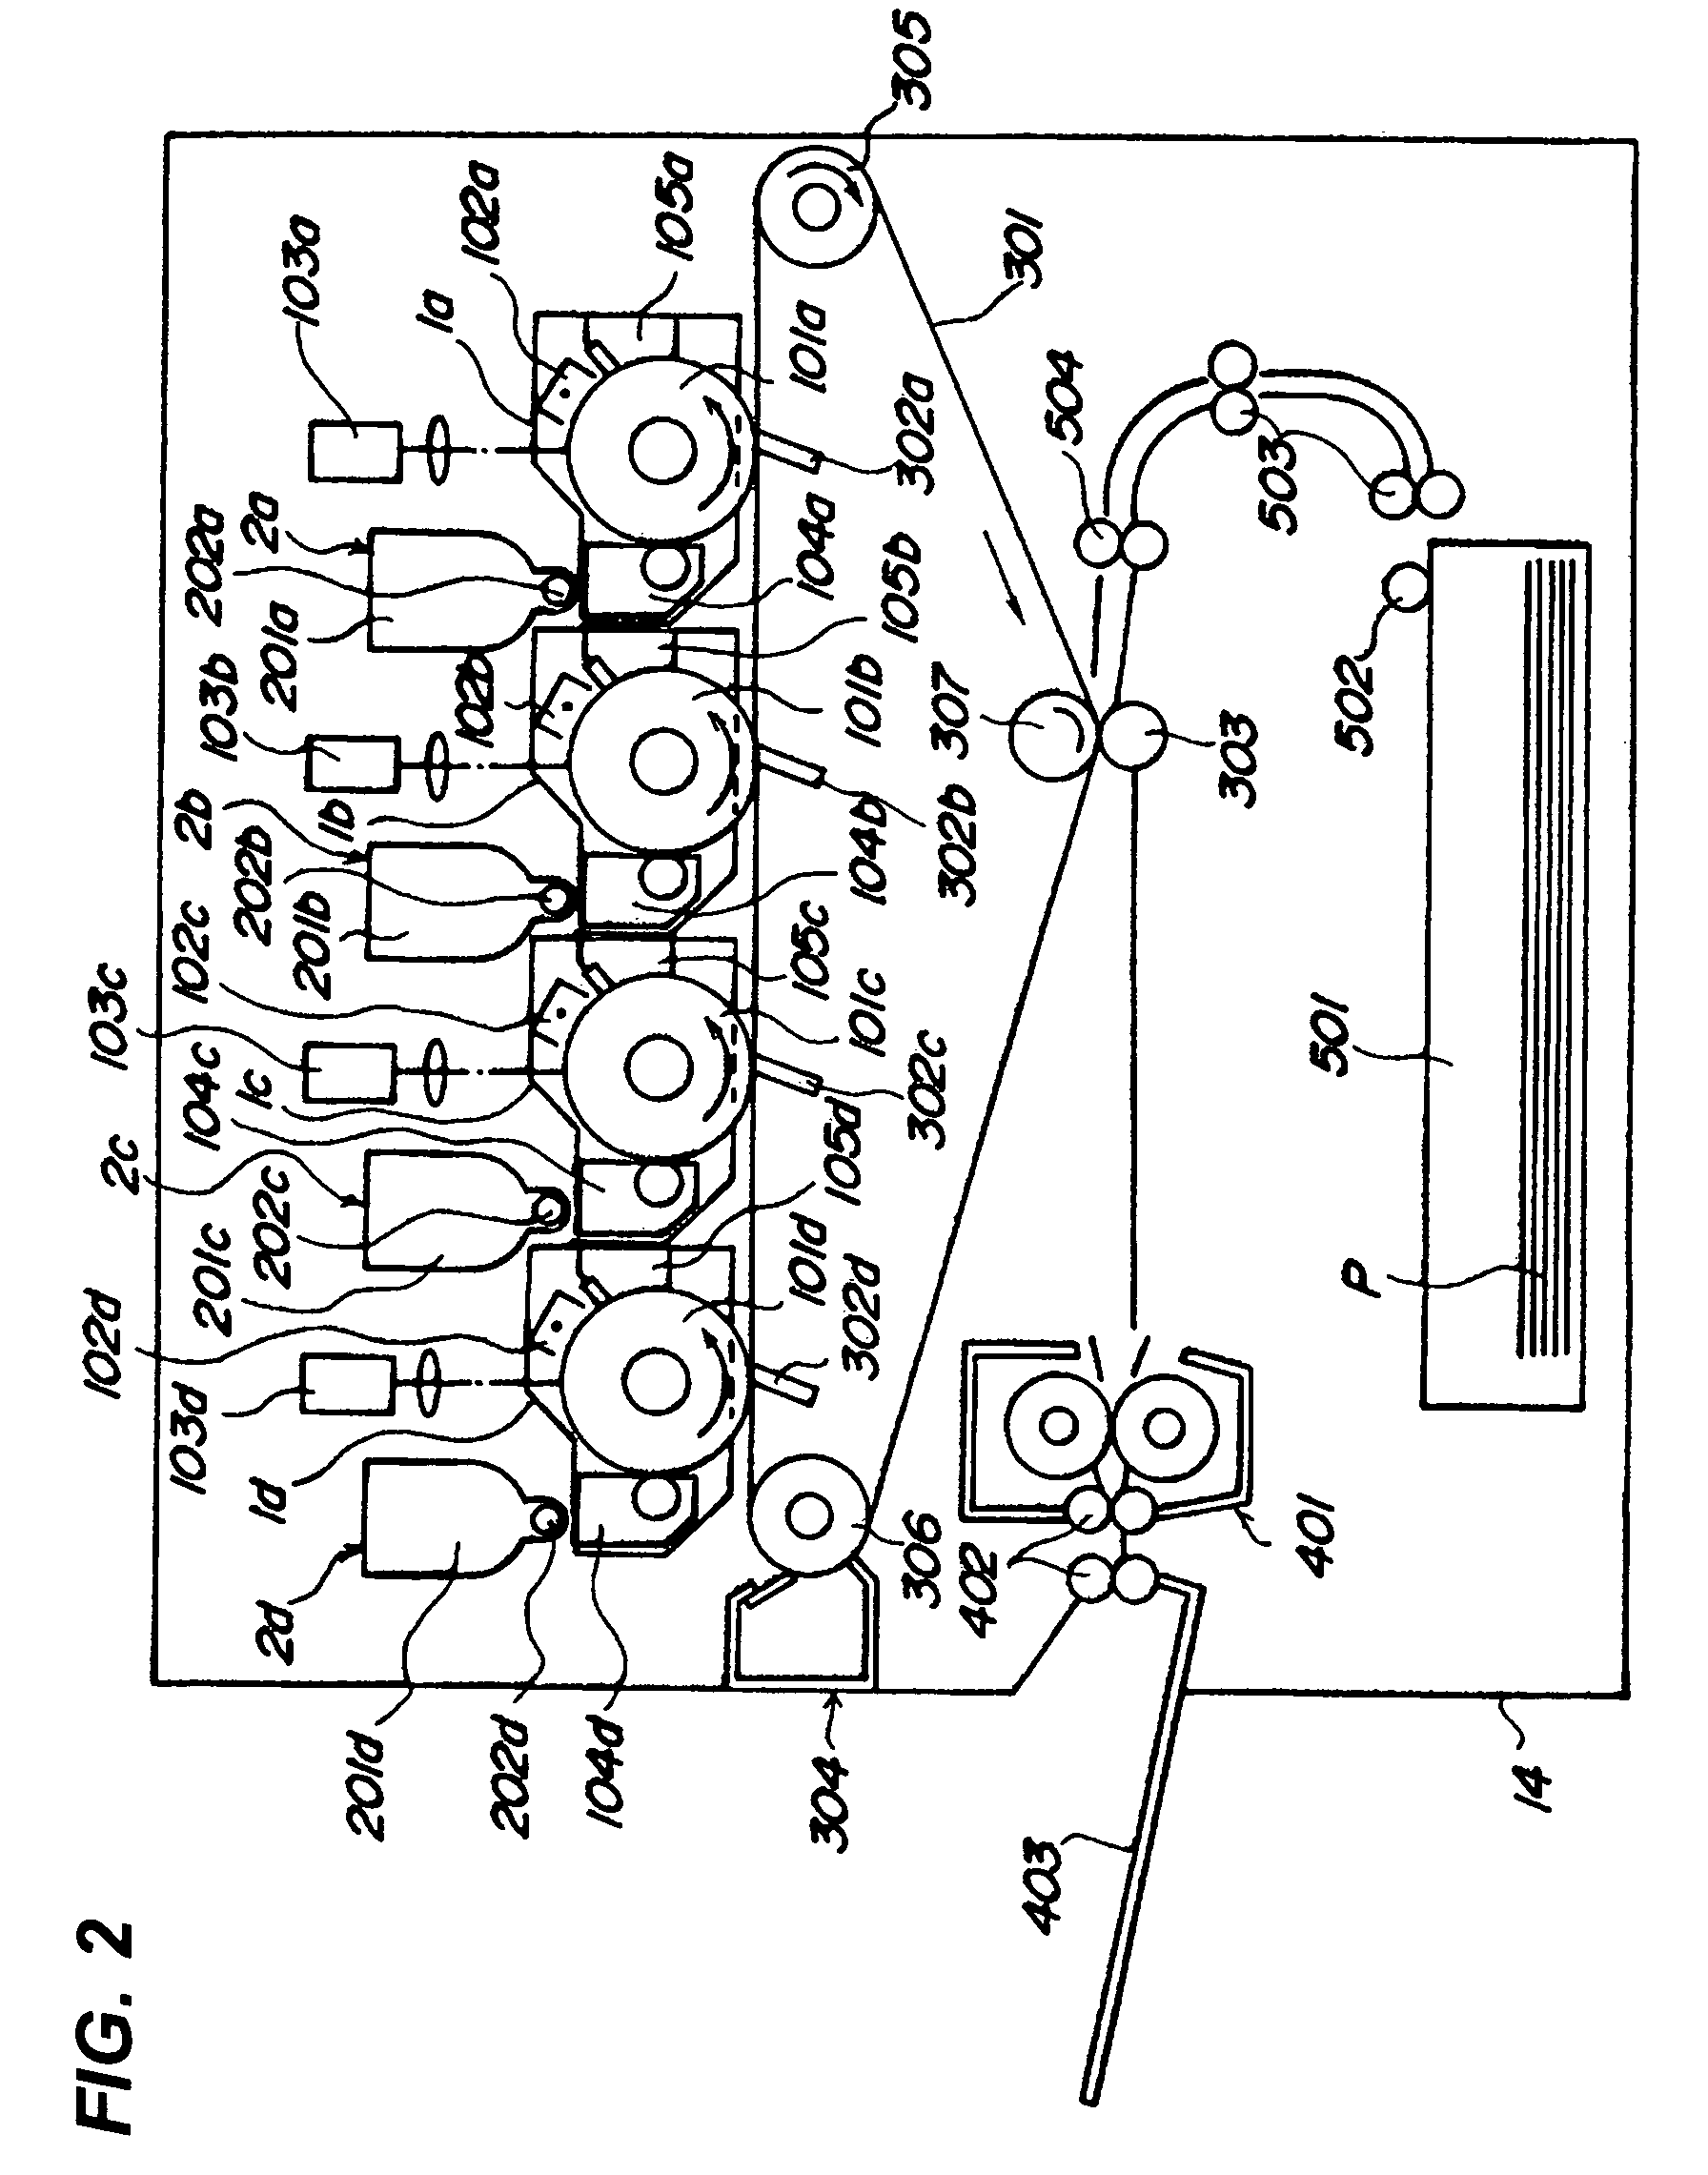 Image forming apparatus having shielded area in which non-contact wireless communication occurs